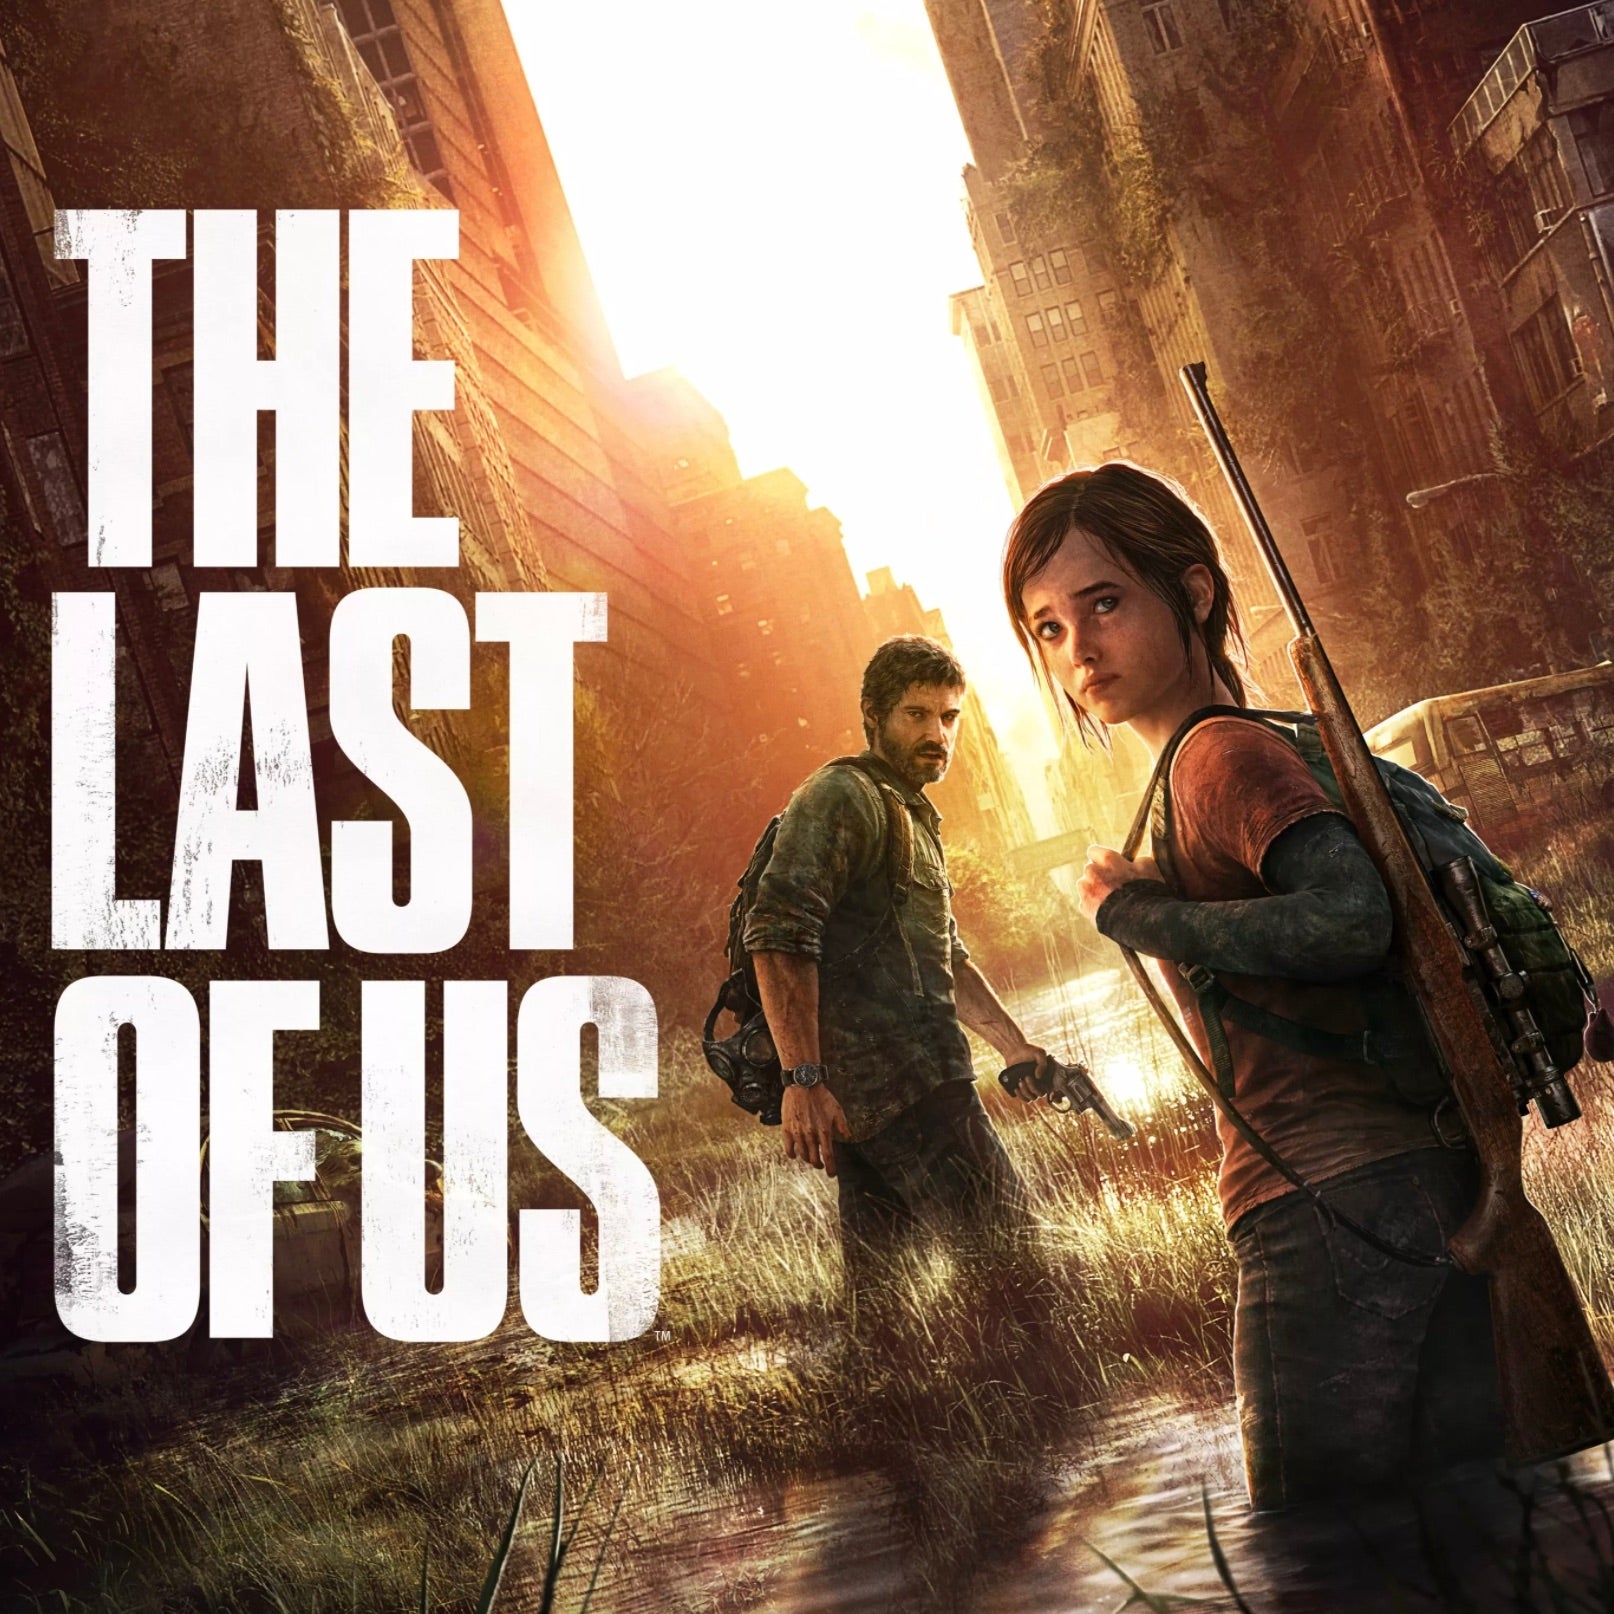 the-last-of-us-ps3-gamerip-2013-mp3-download-the-last-of-us-ps3-gamerip-2013